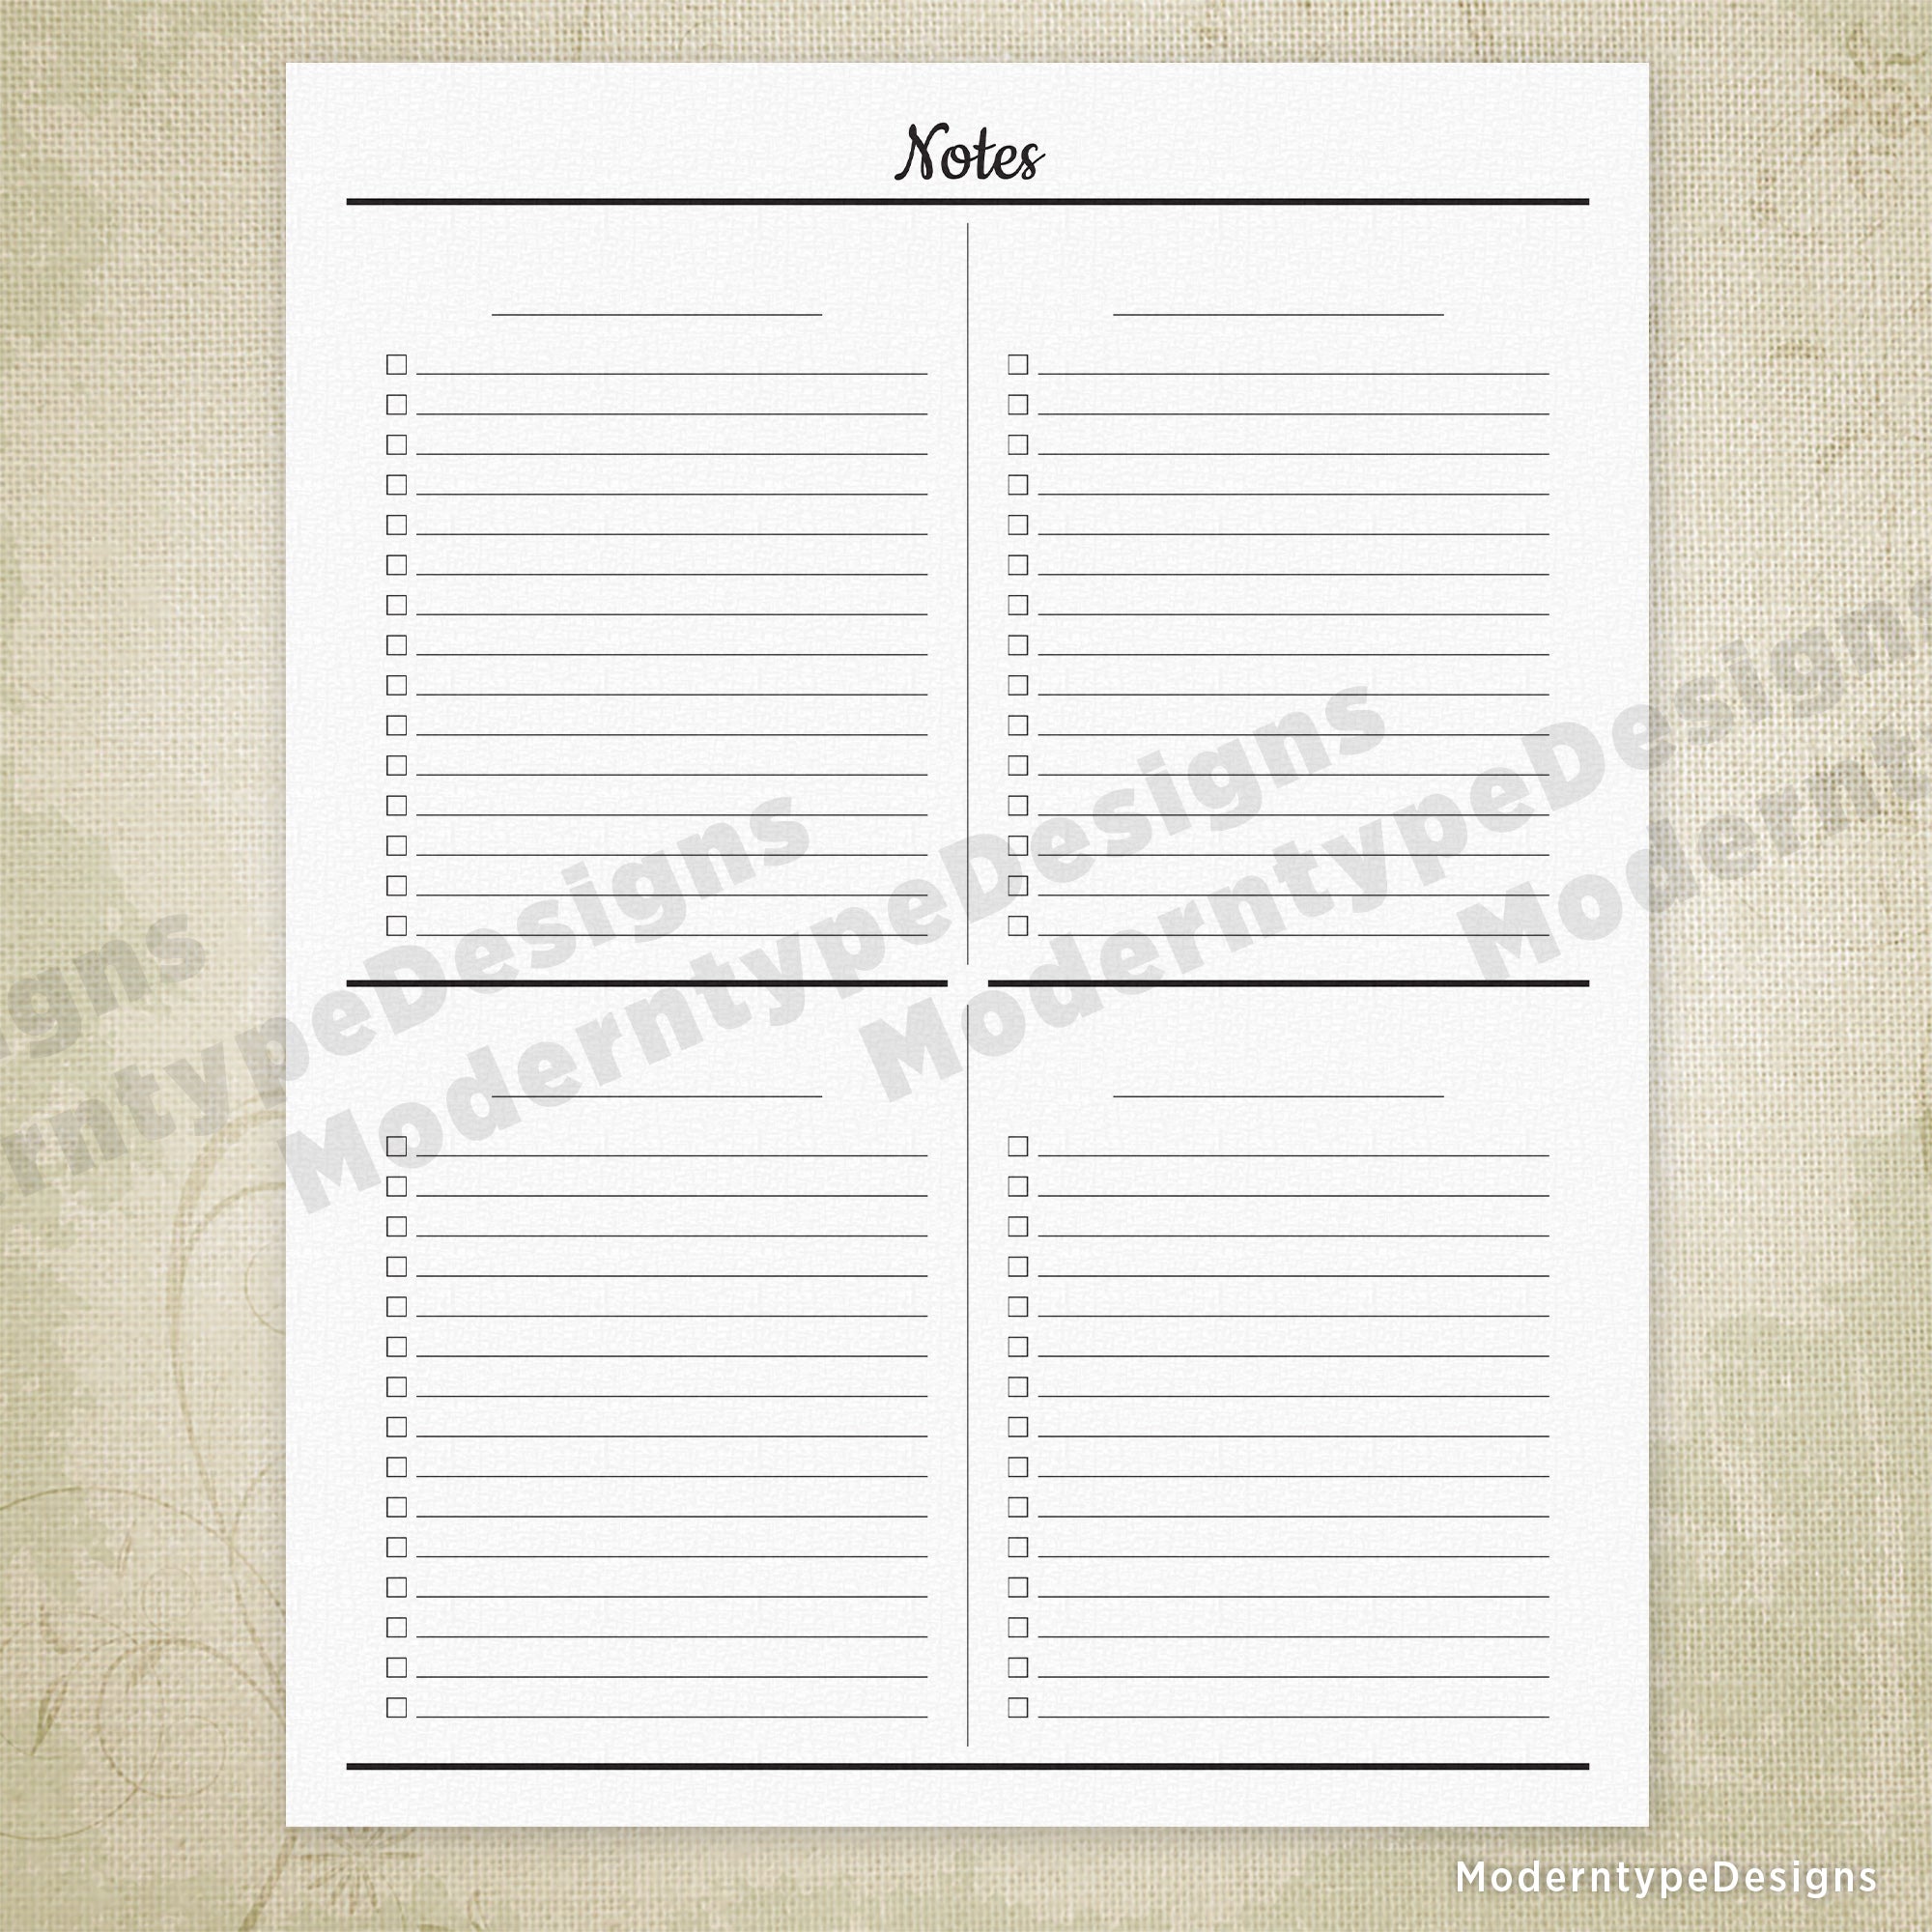 Notes Printable with 4 Sections